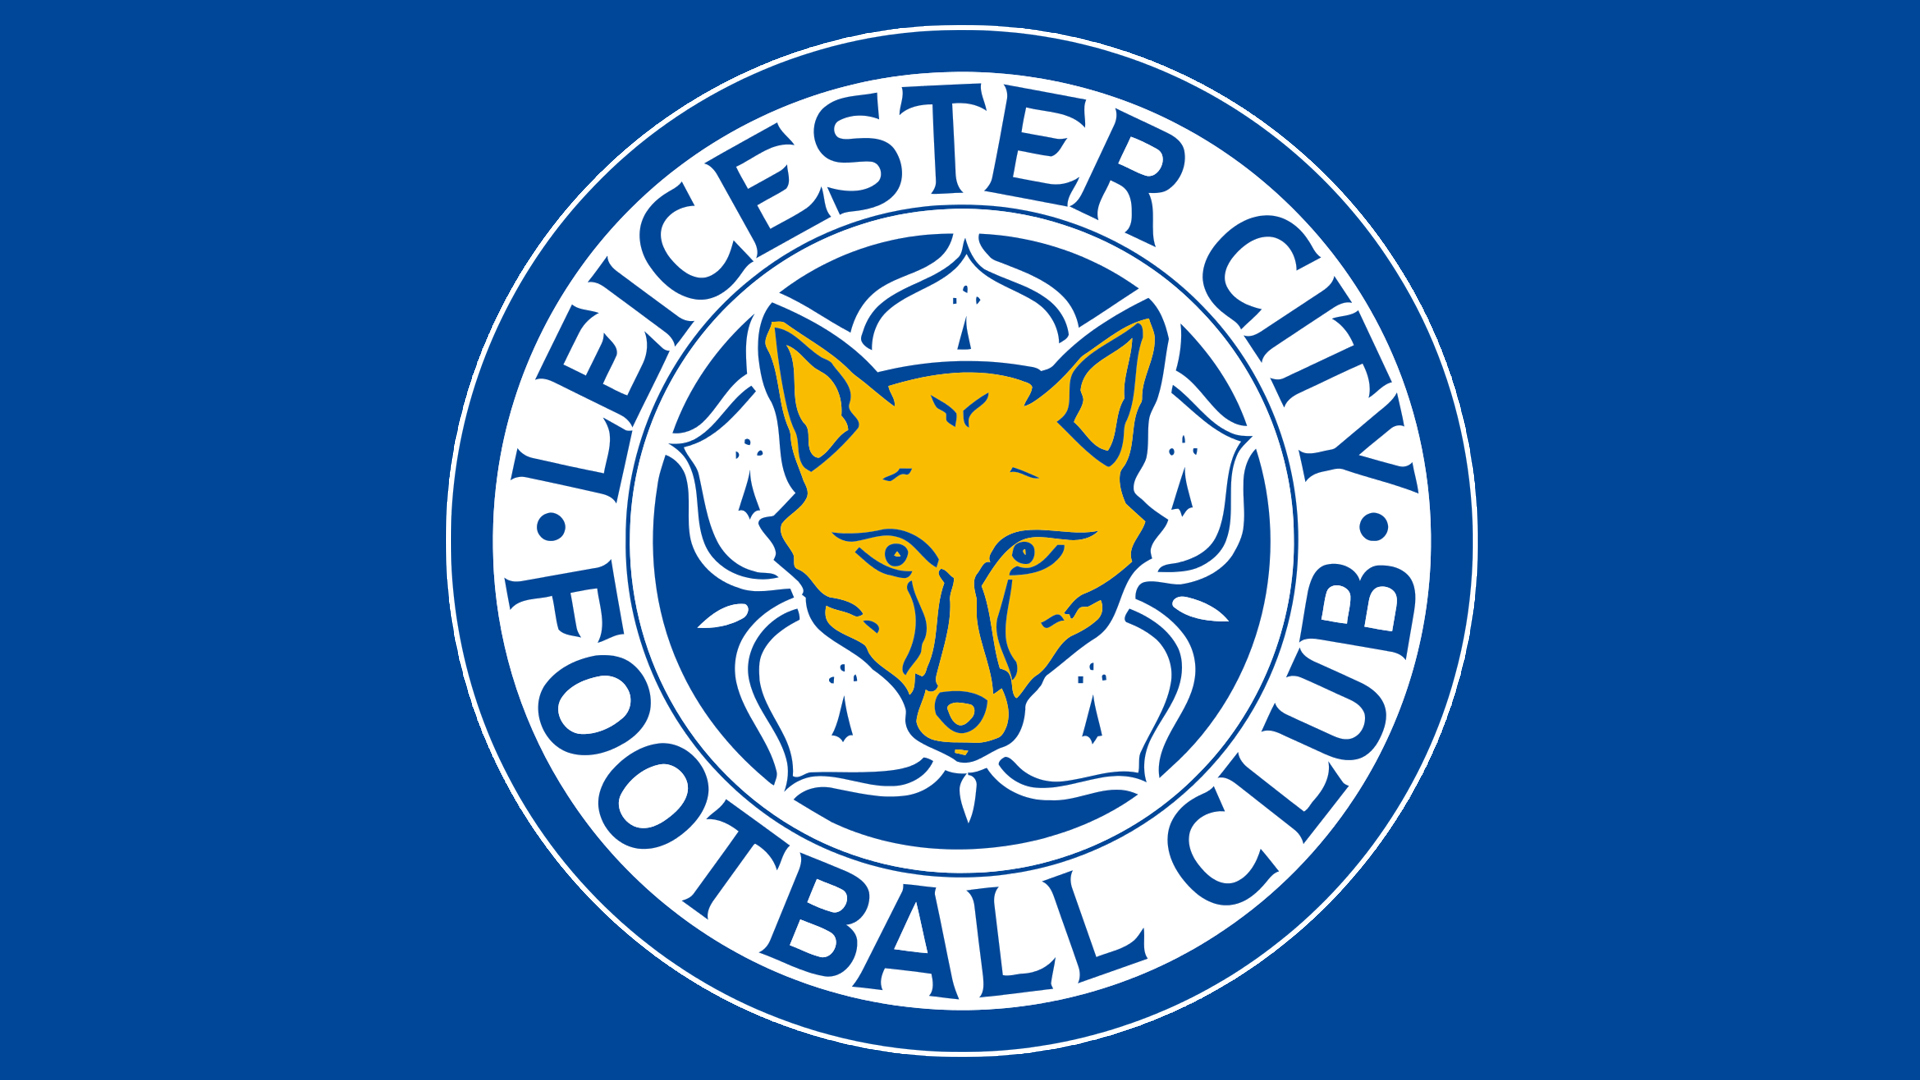 General 1920x1080 Leicester City F.C. Football  blue background sport